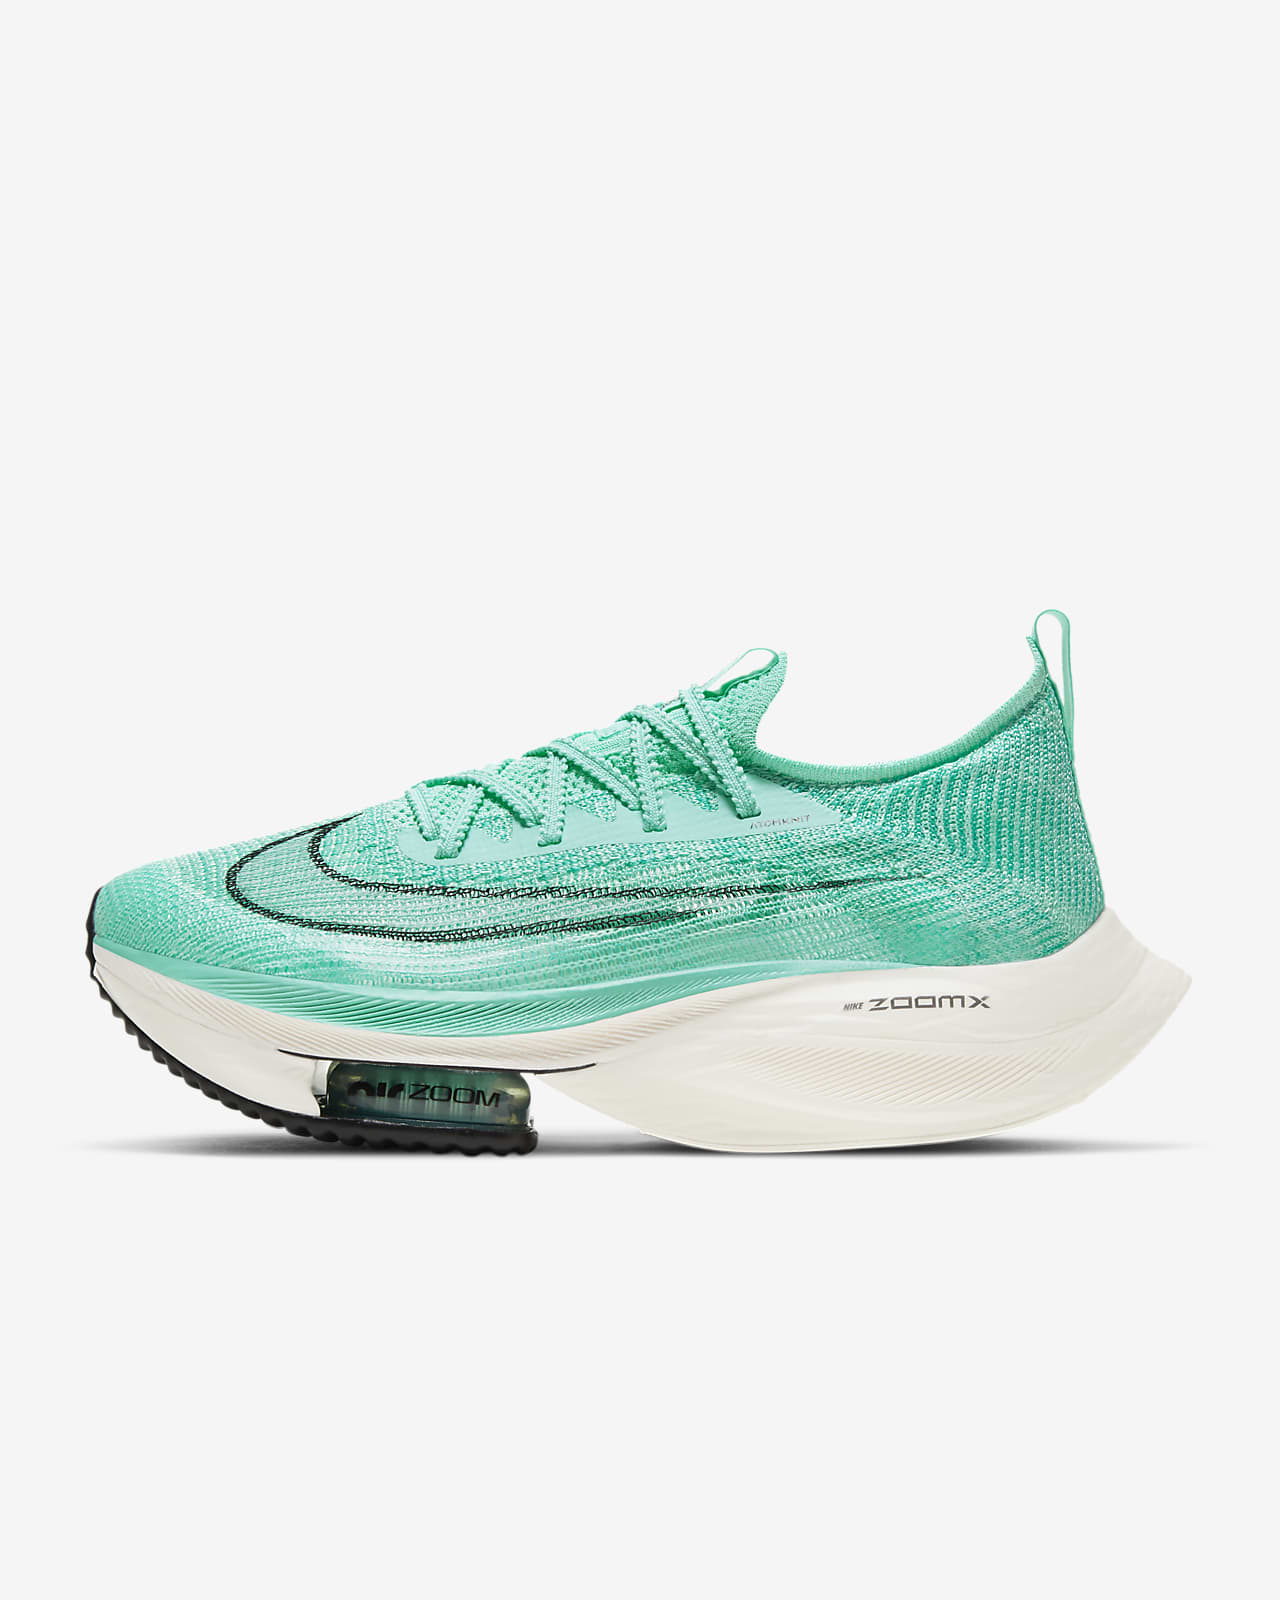 Women's Nike Air Zoom Alphafly Next % Flyknit 'Turquoise' $152.99 Free ...